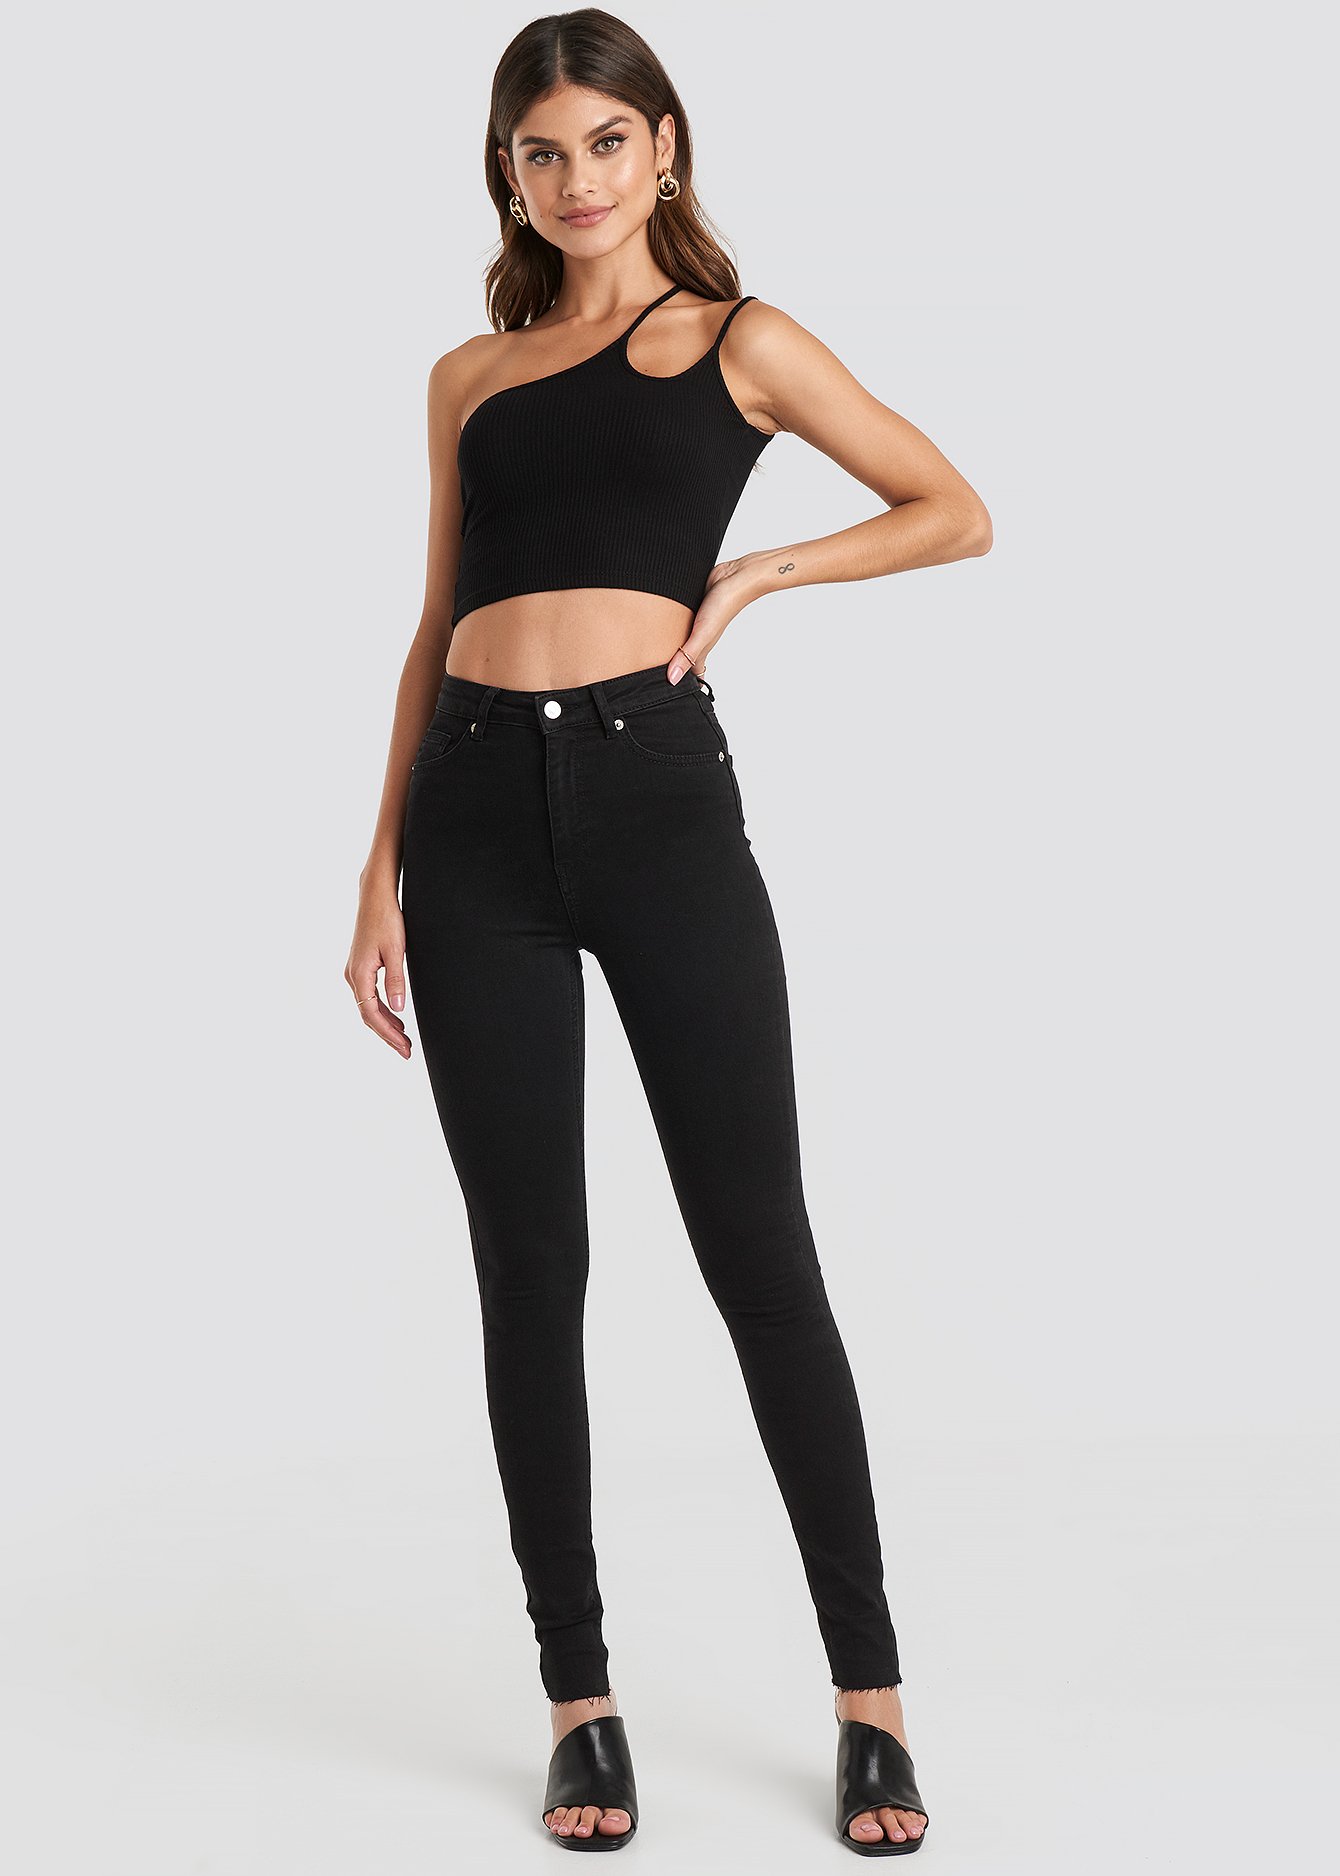 Black Hohe Taille Roher Saum Gerade Jeans